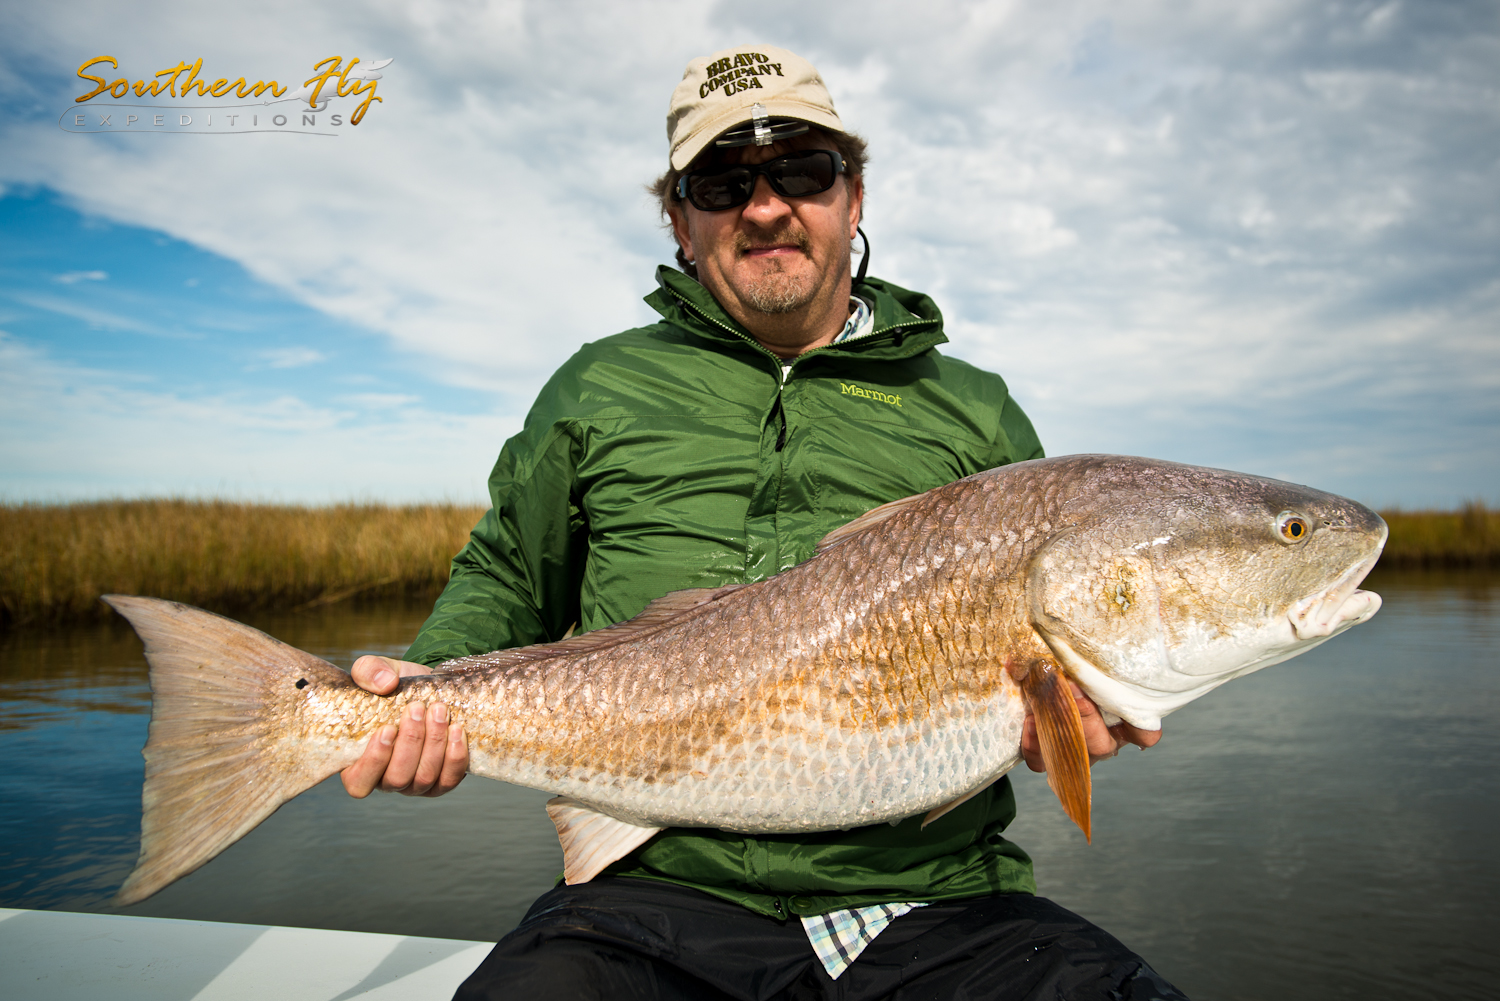 2015-12-16-17-Southern-Fly-Expeditions-BrettBruner-6.jpg